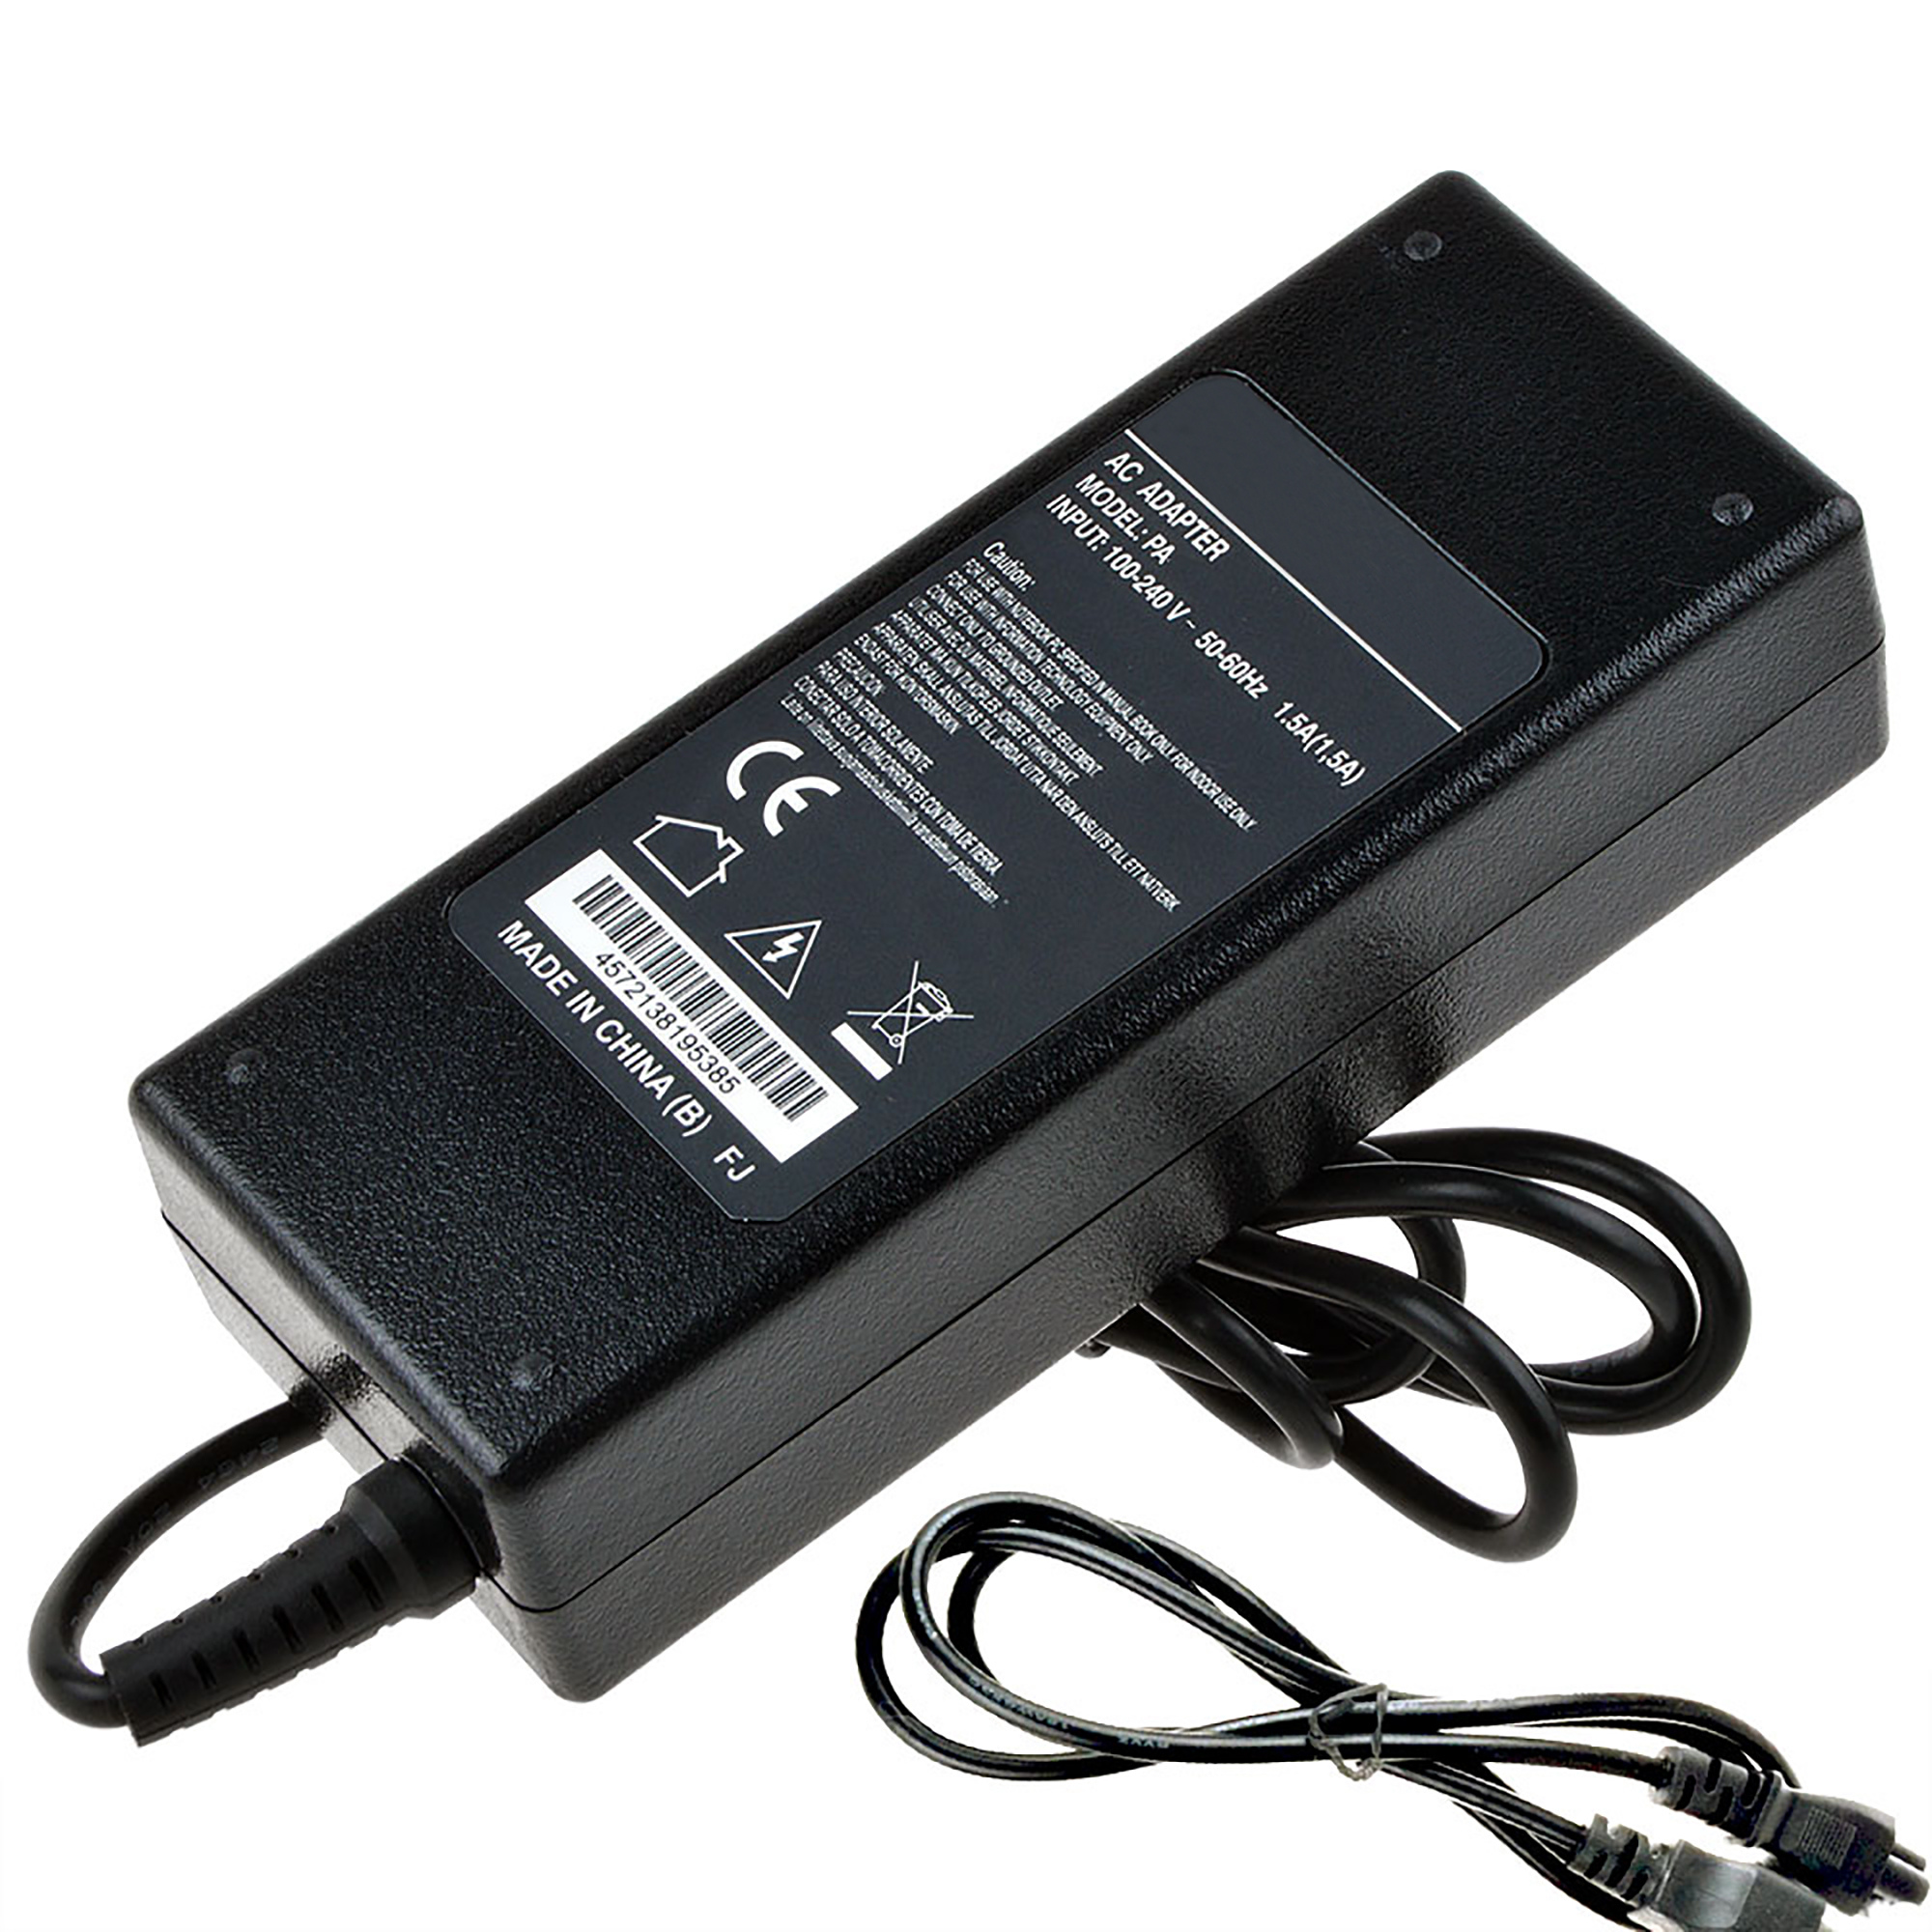 PKPOWER AC Adapter Replacement for Vizio VSB210WS Sound Bar Speaker Wireless Subwoofer Power Supply - image 4 of 5